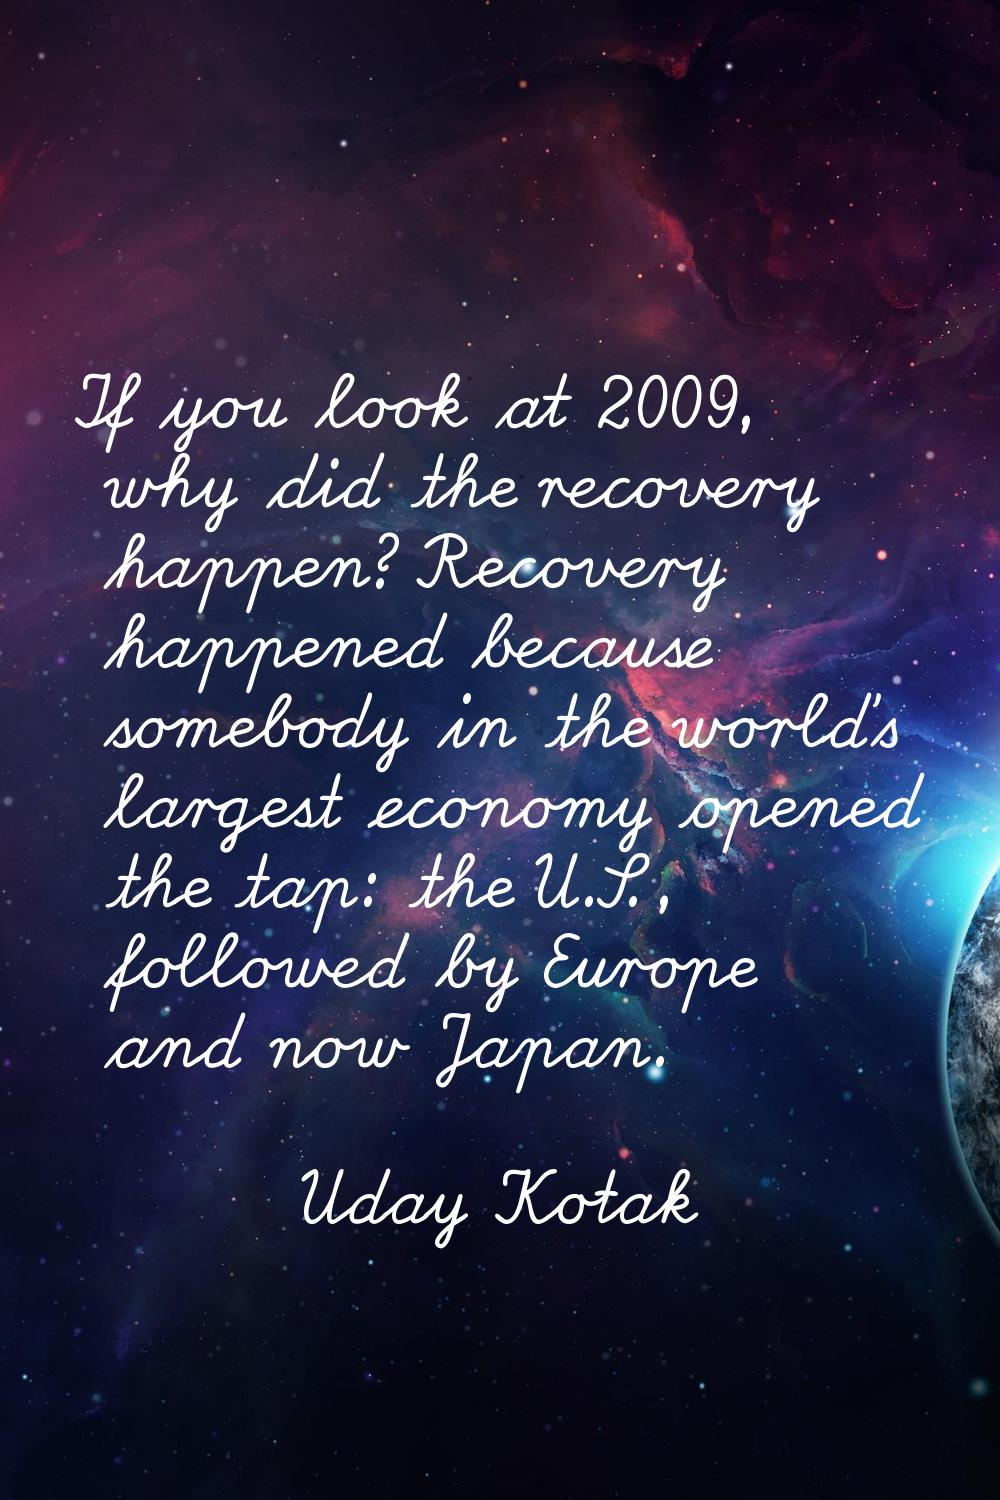 If you look at 2009, why did the recovery happen? Recovery happened because somebody in the world's